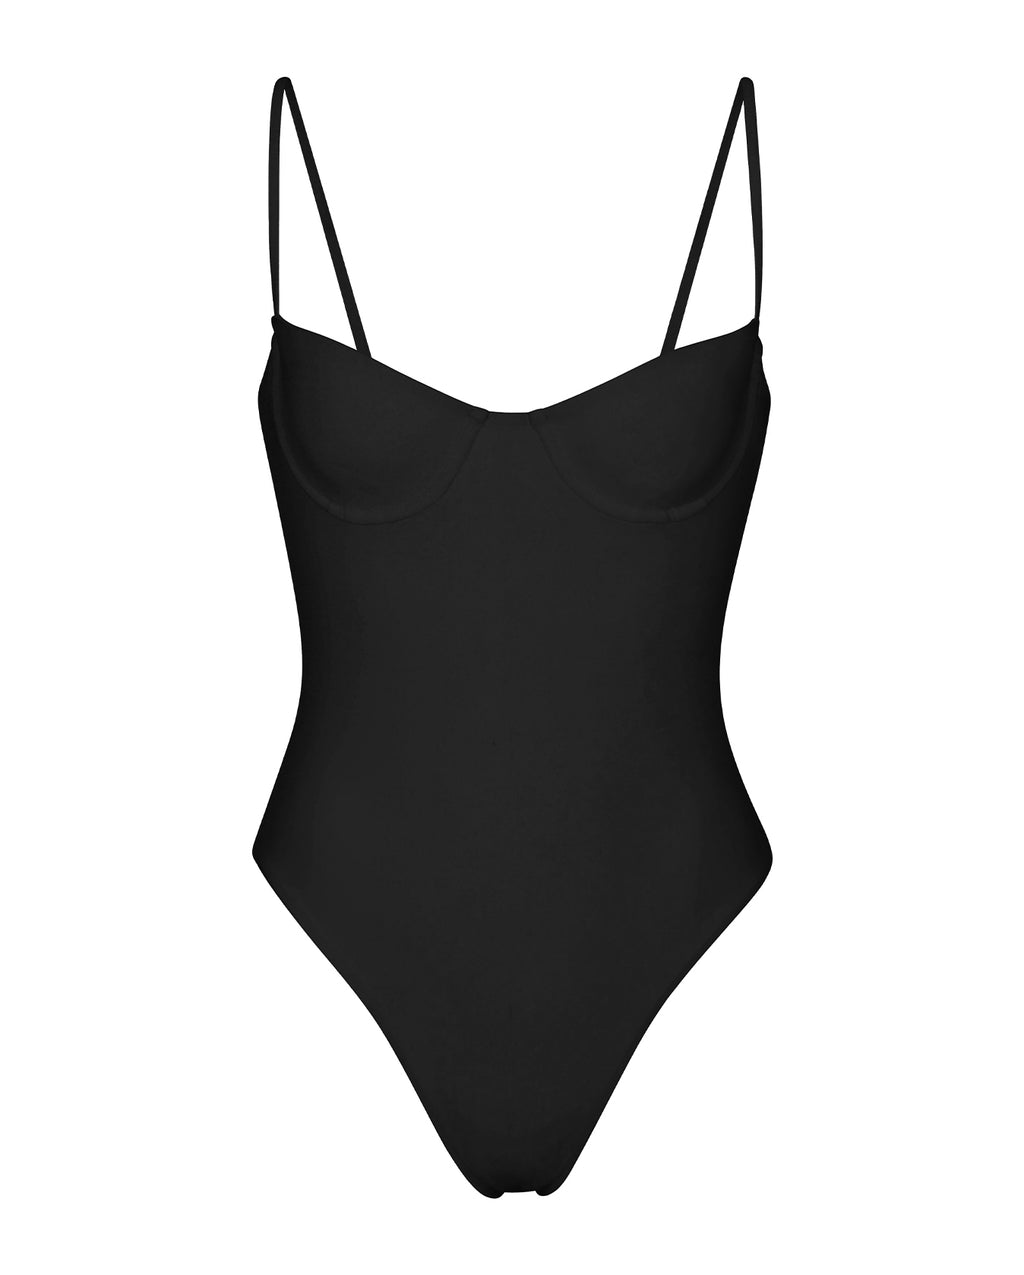 Cotton On black balconette one piece cheeky swimsuit bathing suit  Cheeky  swimsuits, Swimsuit bathing suit, Black one piece swimsuit